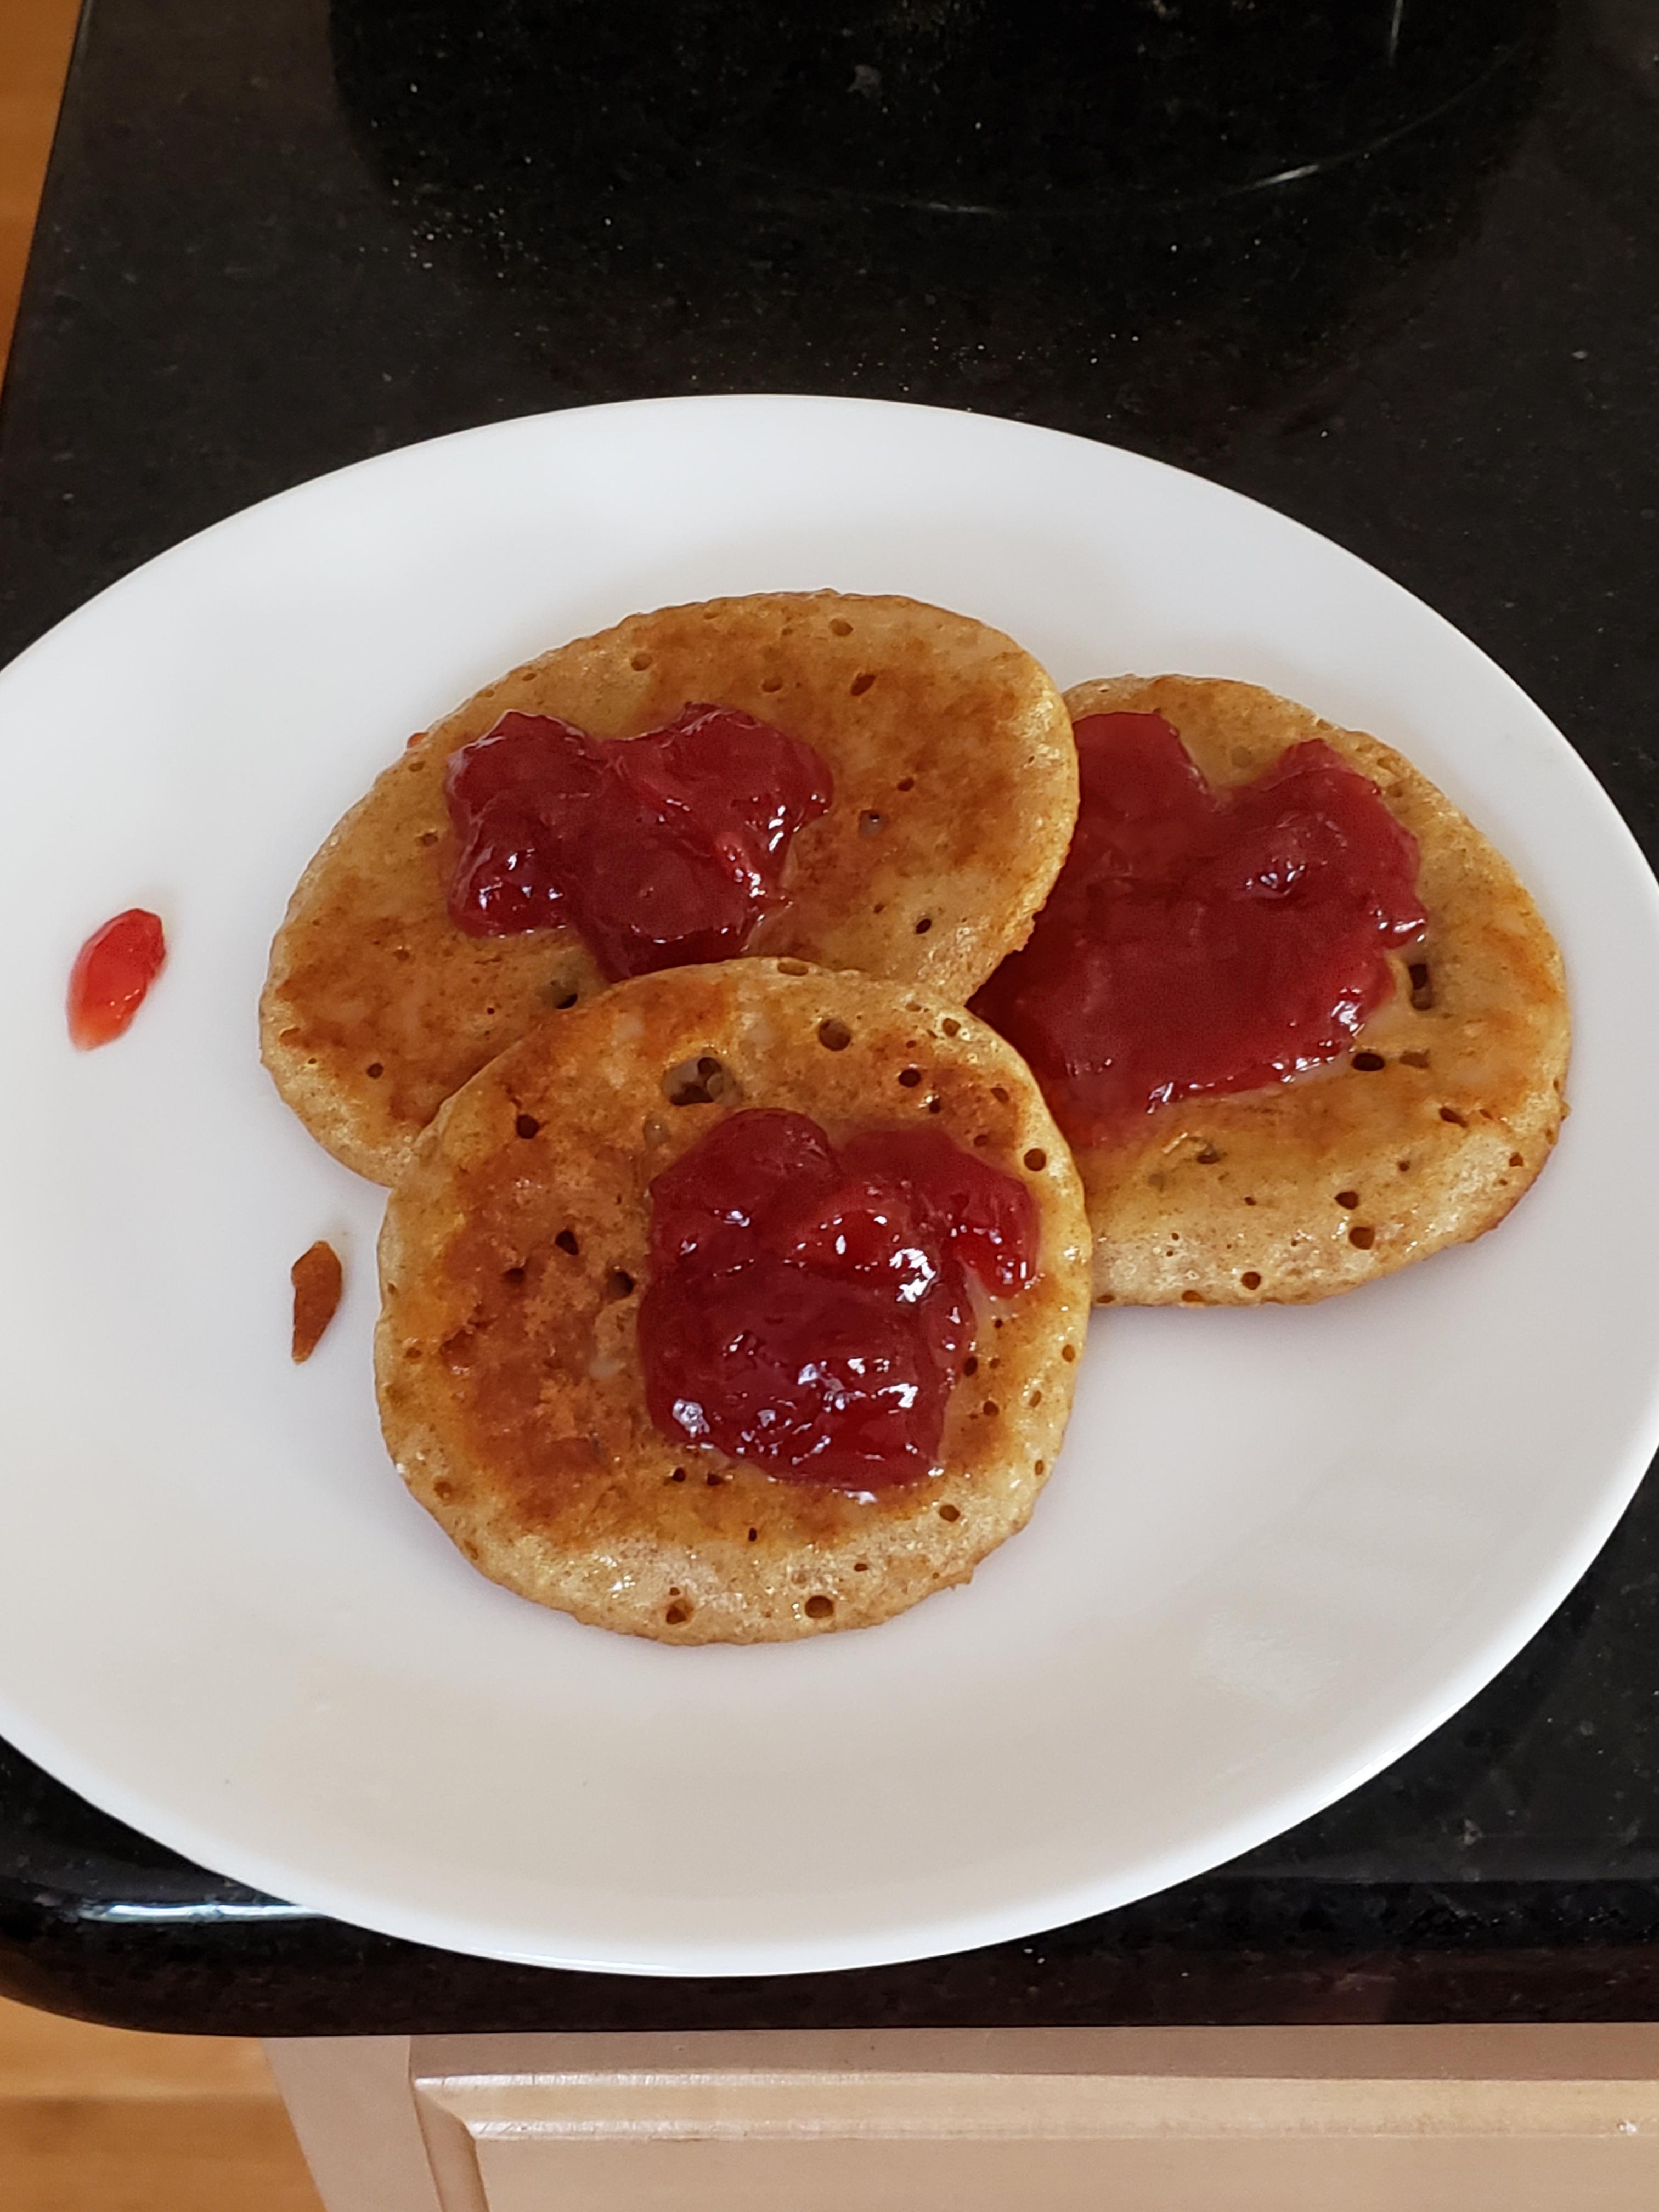 Crumpets made with leftover unfed sourdough starter ...